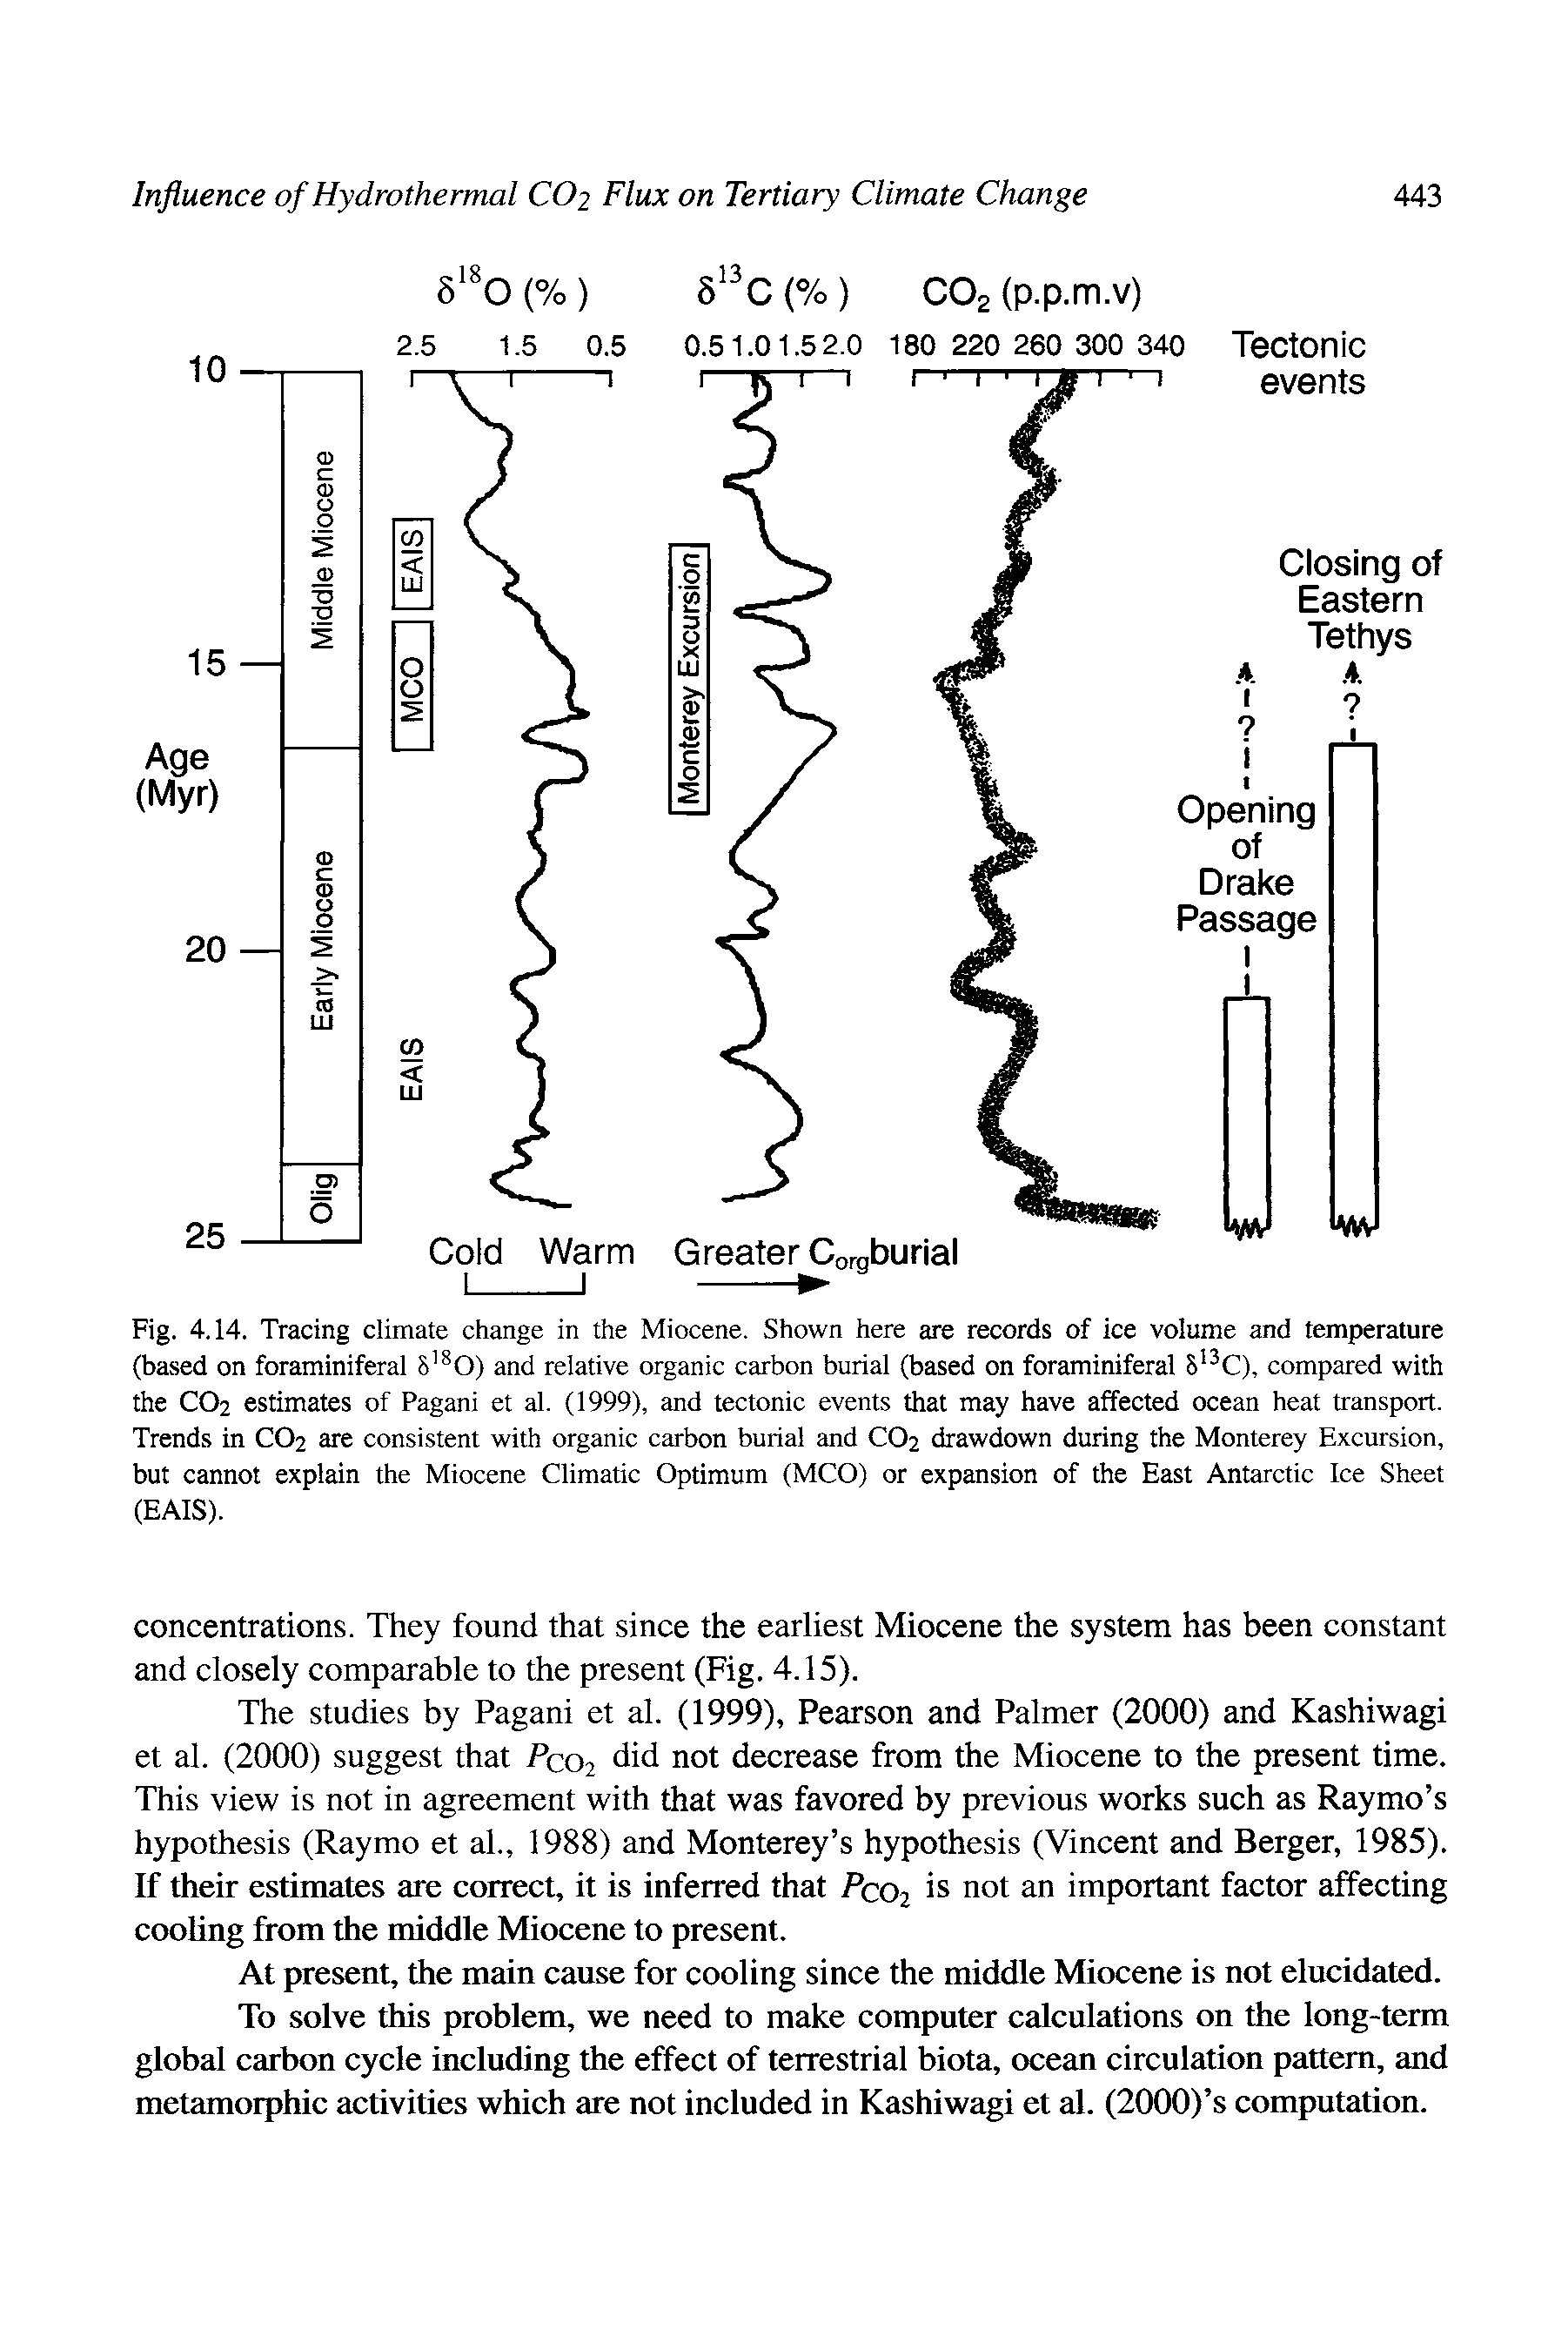 Fig. 4.14. Tracing climate change in the Miocene. Shown here are records of ice volume and temperature (based on foraminiferal S 0) and relative organic carbon burial (based on foraminiferal S C), compared with the CO2 estimates of Pagani et al. (1999), and tectonic events that may have affected ocean heat transport. Trends in CO2 are consistent with organic carbon burial and CO2 drawdown during the Monterey Excursion, but cannot explain the Miocene Climatic Optimum (MCO) or expansion of the East Antarctic Ice Sheet (EAIS).